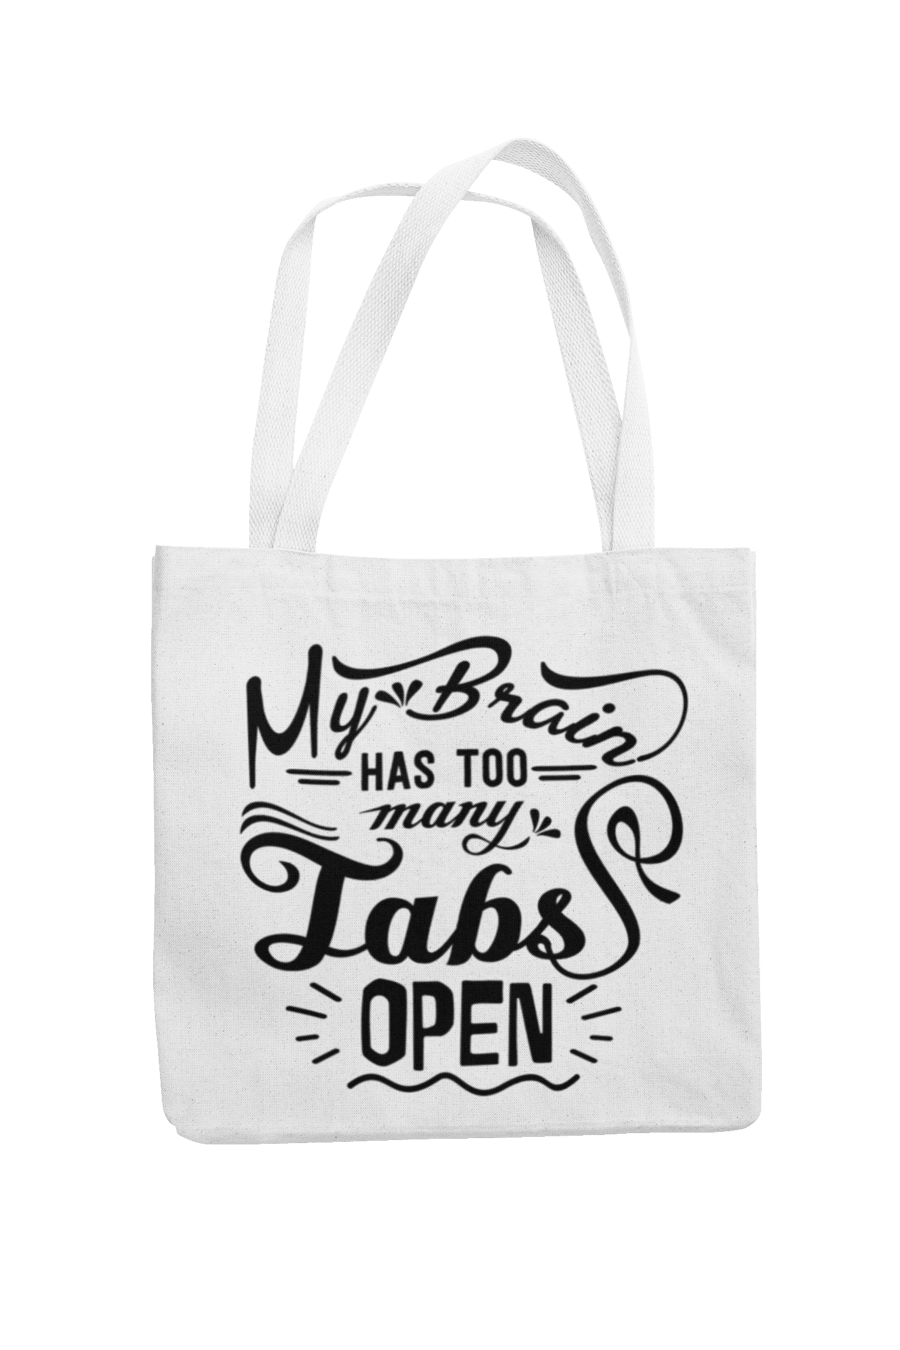 My Brain Has Too Many Tabs Open - Funny Tote Bag